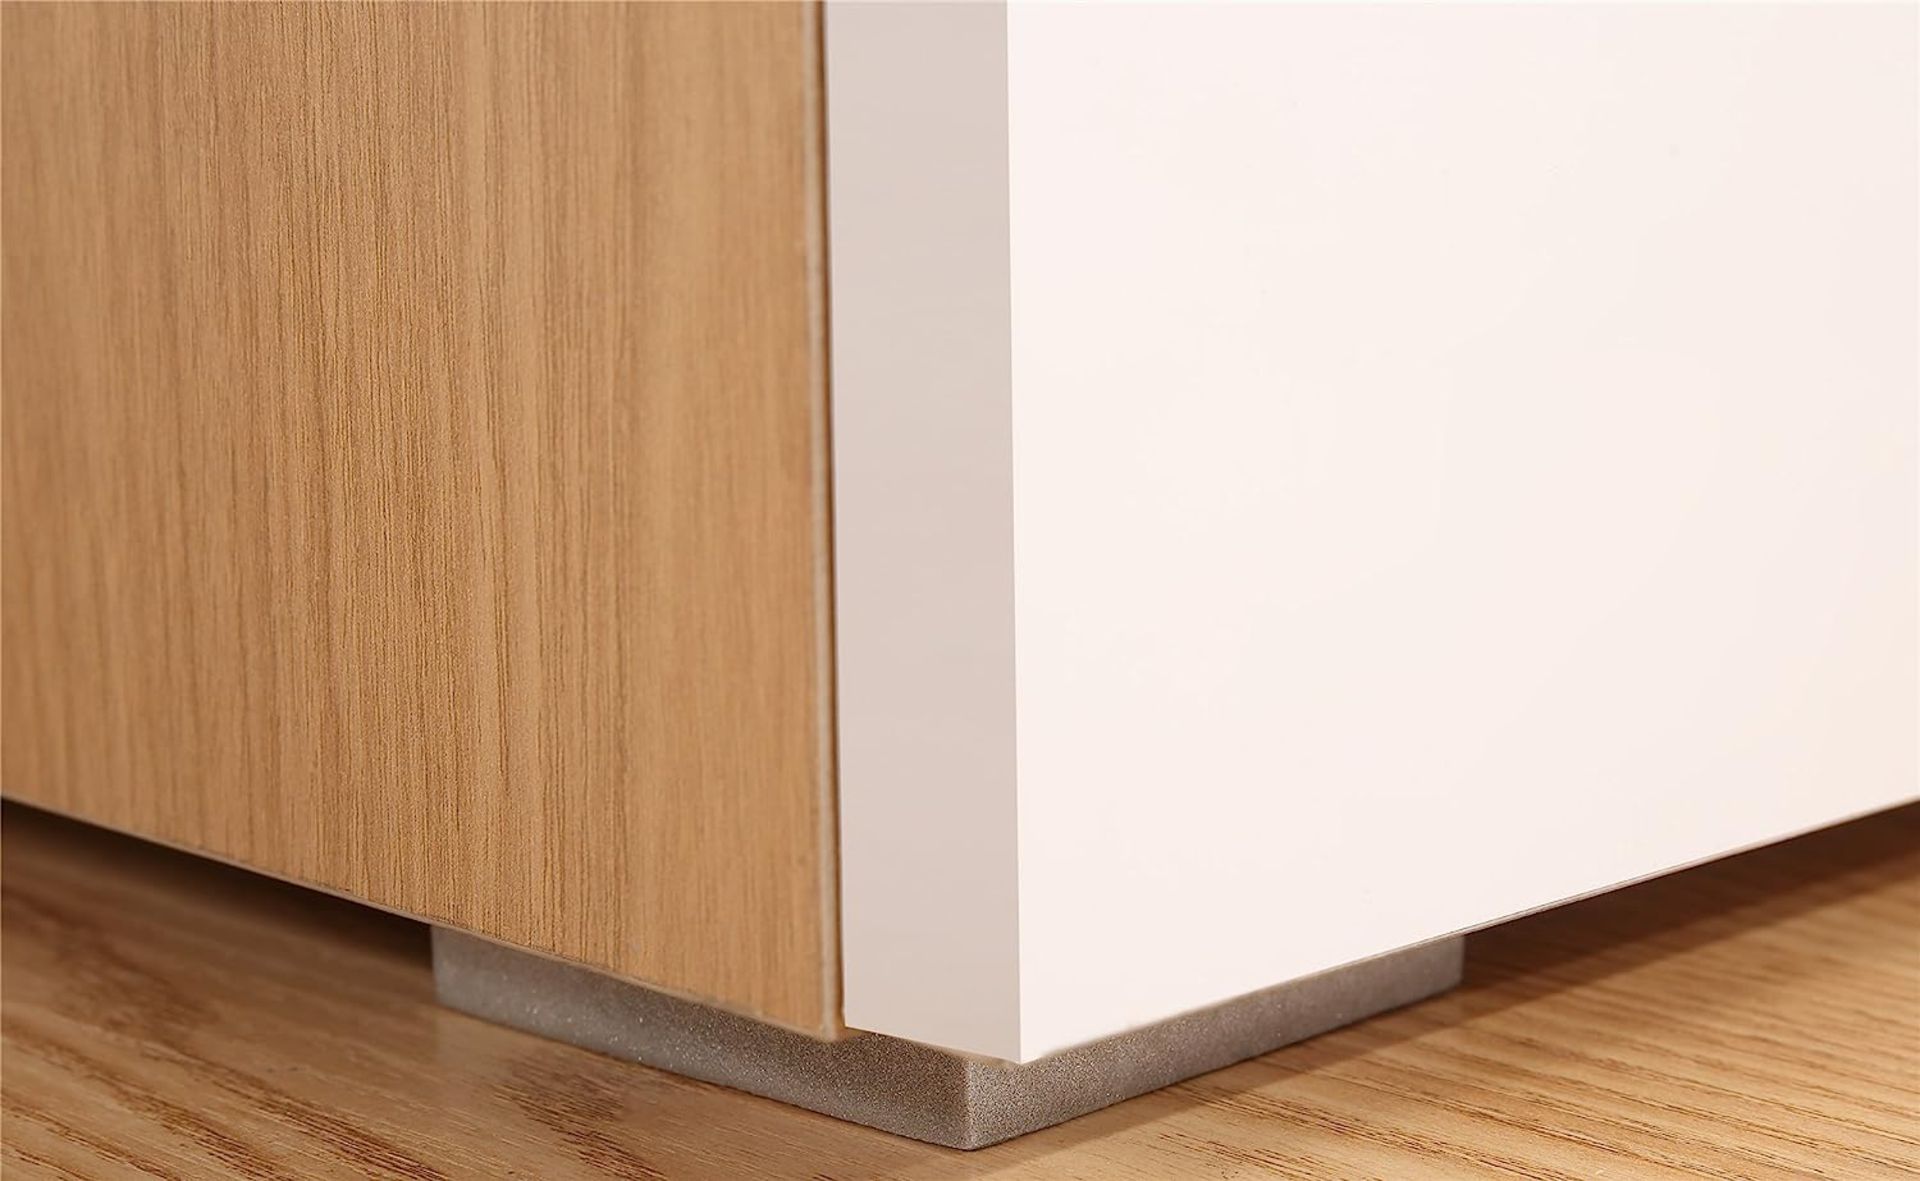 BRAND NEW HARMIN MODERN 160CM TV STAND CABINET UNIT WITH HIGH GLOSS DOORS (WHITE ON OAK) - Image 9 of 9